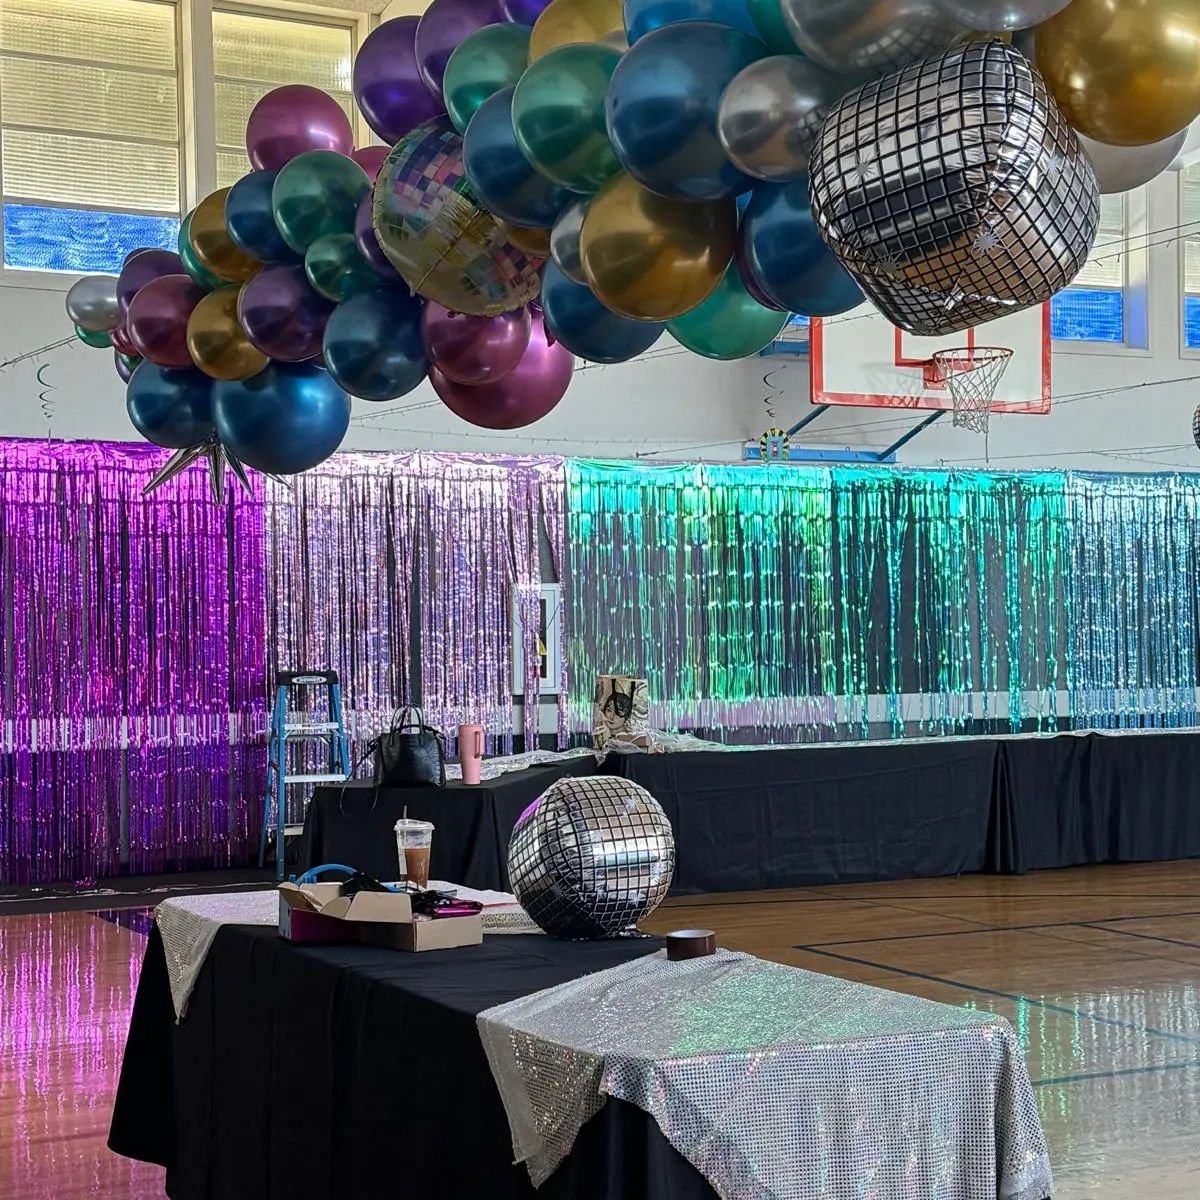 Have you ever seen the gym looking this amazing??? We can't wait to see you tonight for the Take Us Back dinner and auction! The dedicated core team has been hard at work all day today and yesterday to bring their vision to life. Looking forward to s